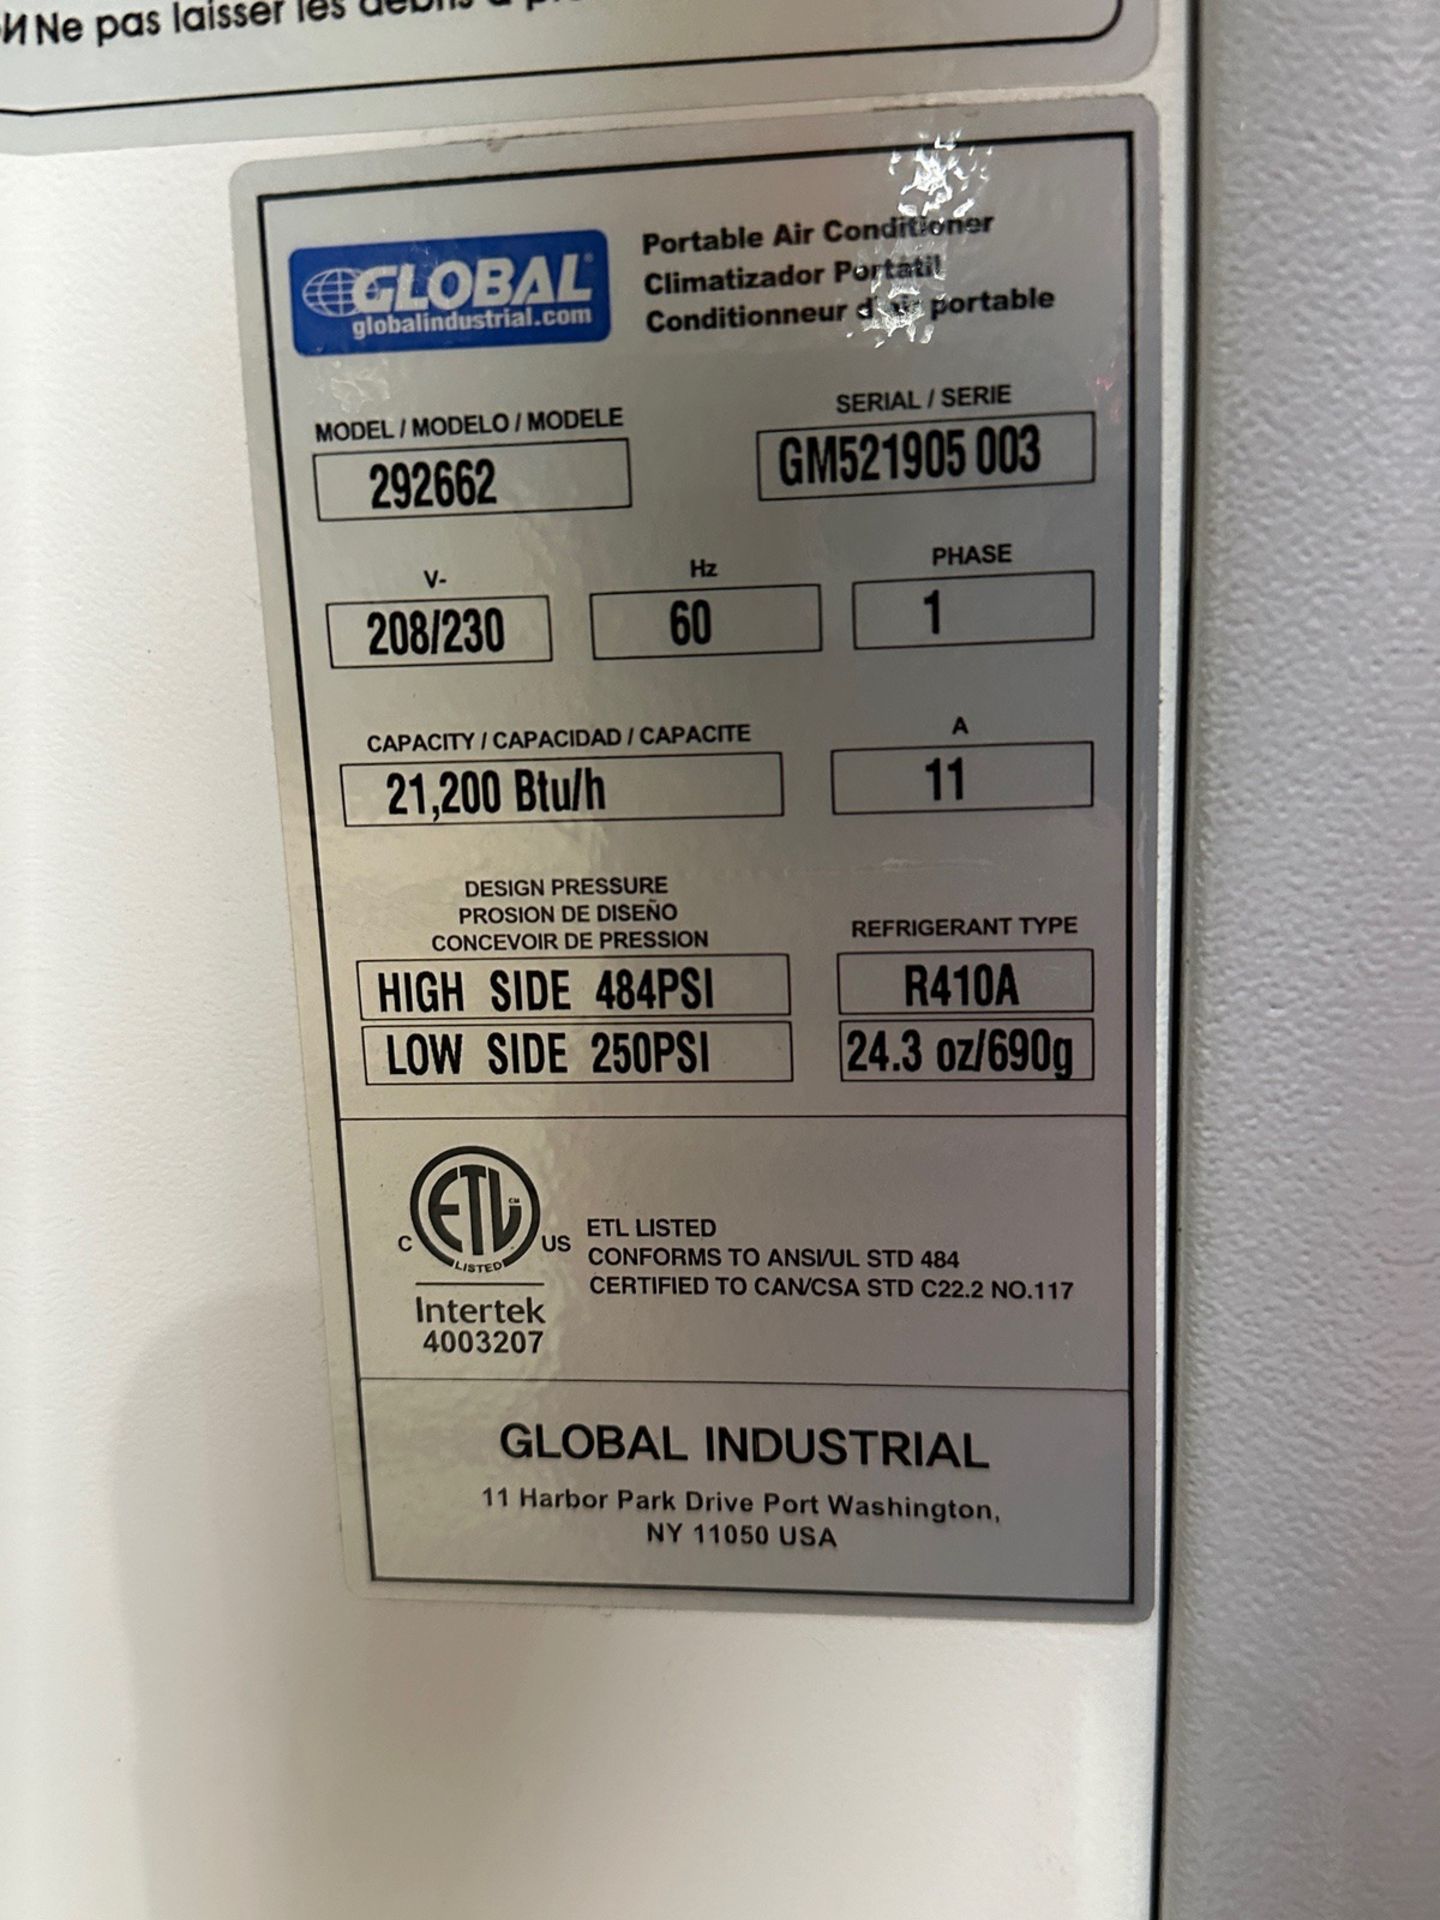 Global Portable A/C Unit - Model 292662 | Rig Fee $35 - Image 2 of 2